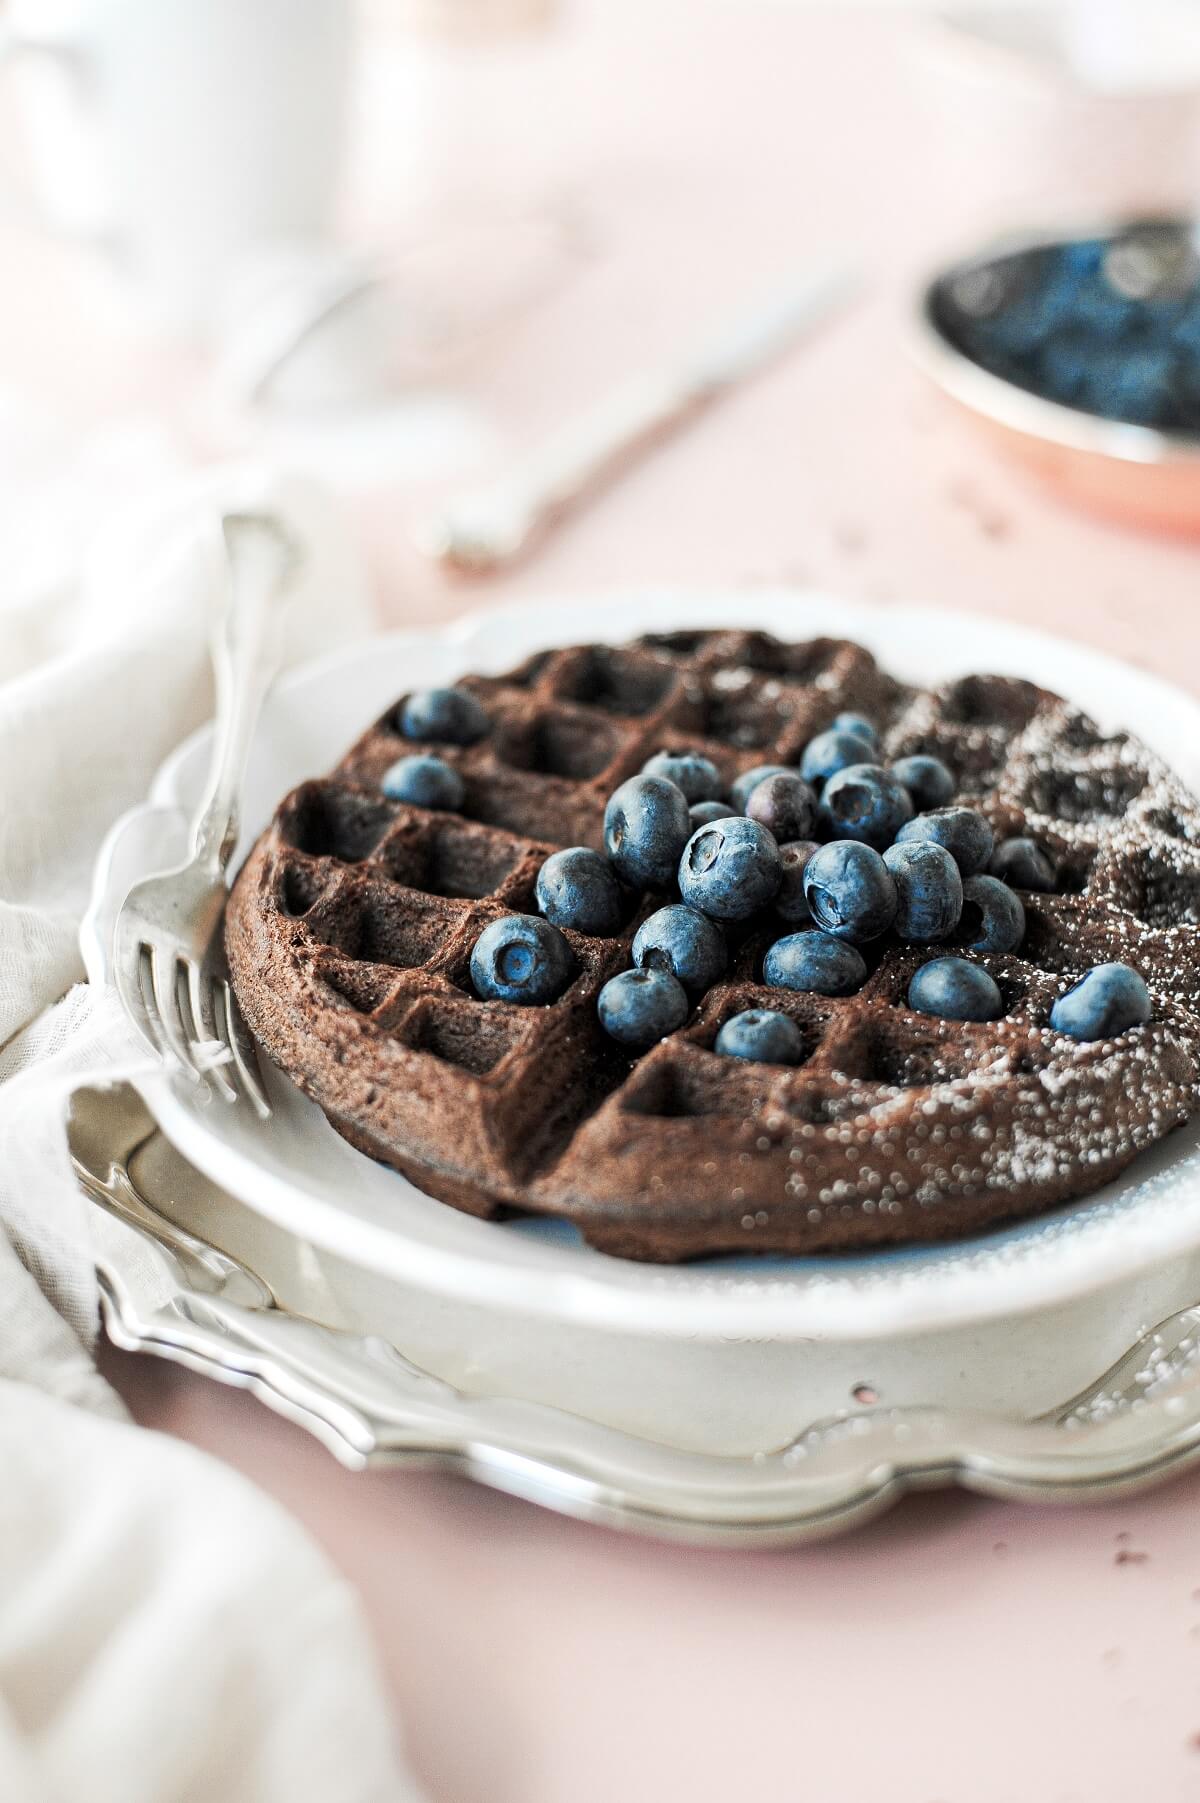 A chocolate waffle topped with blueberries.